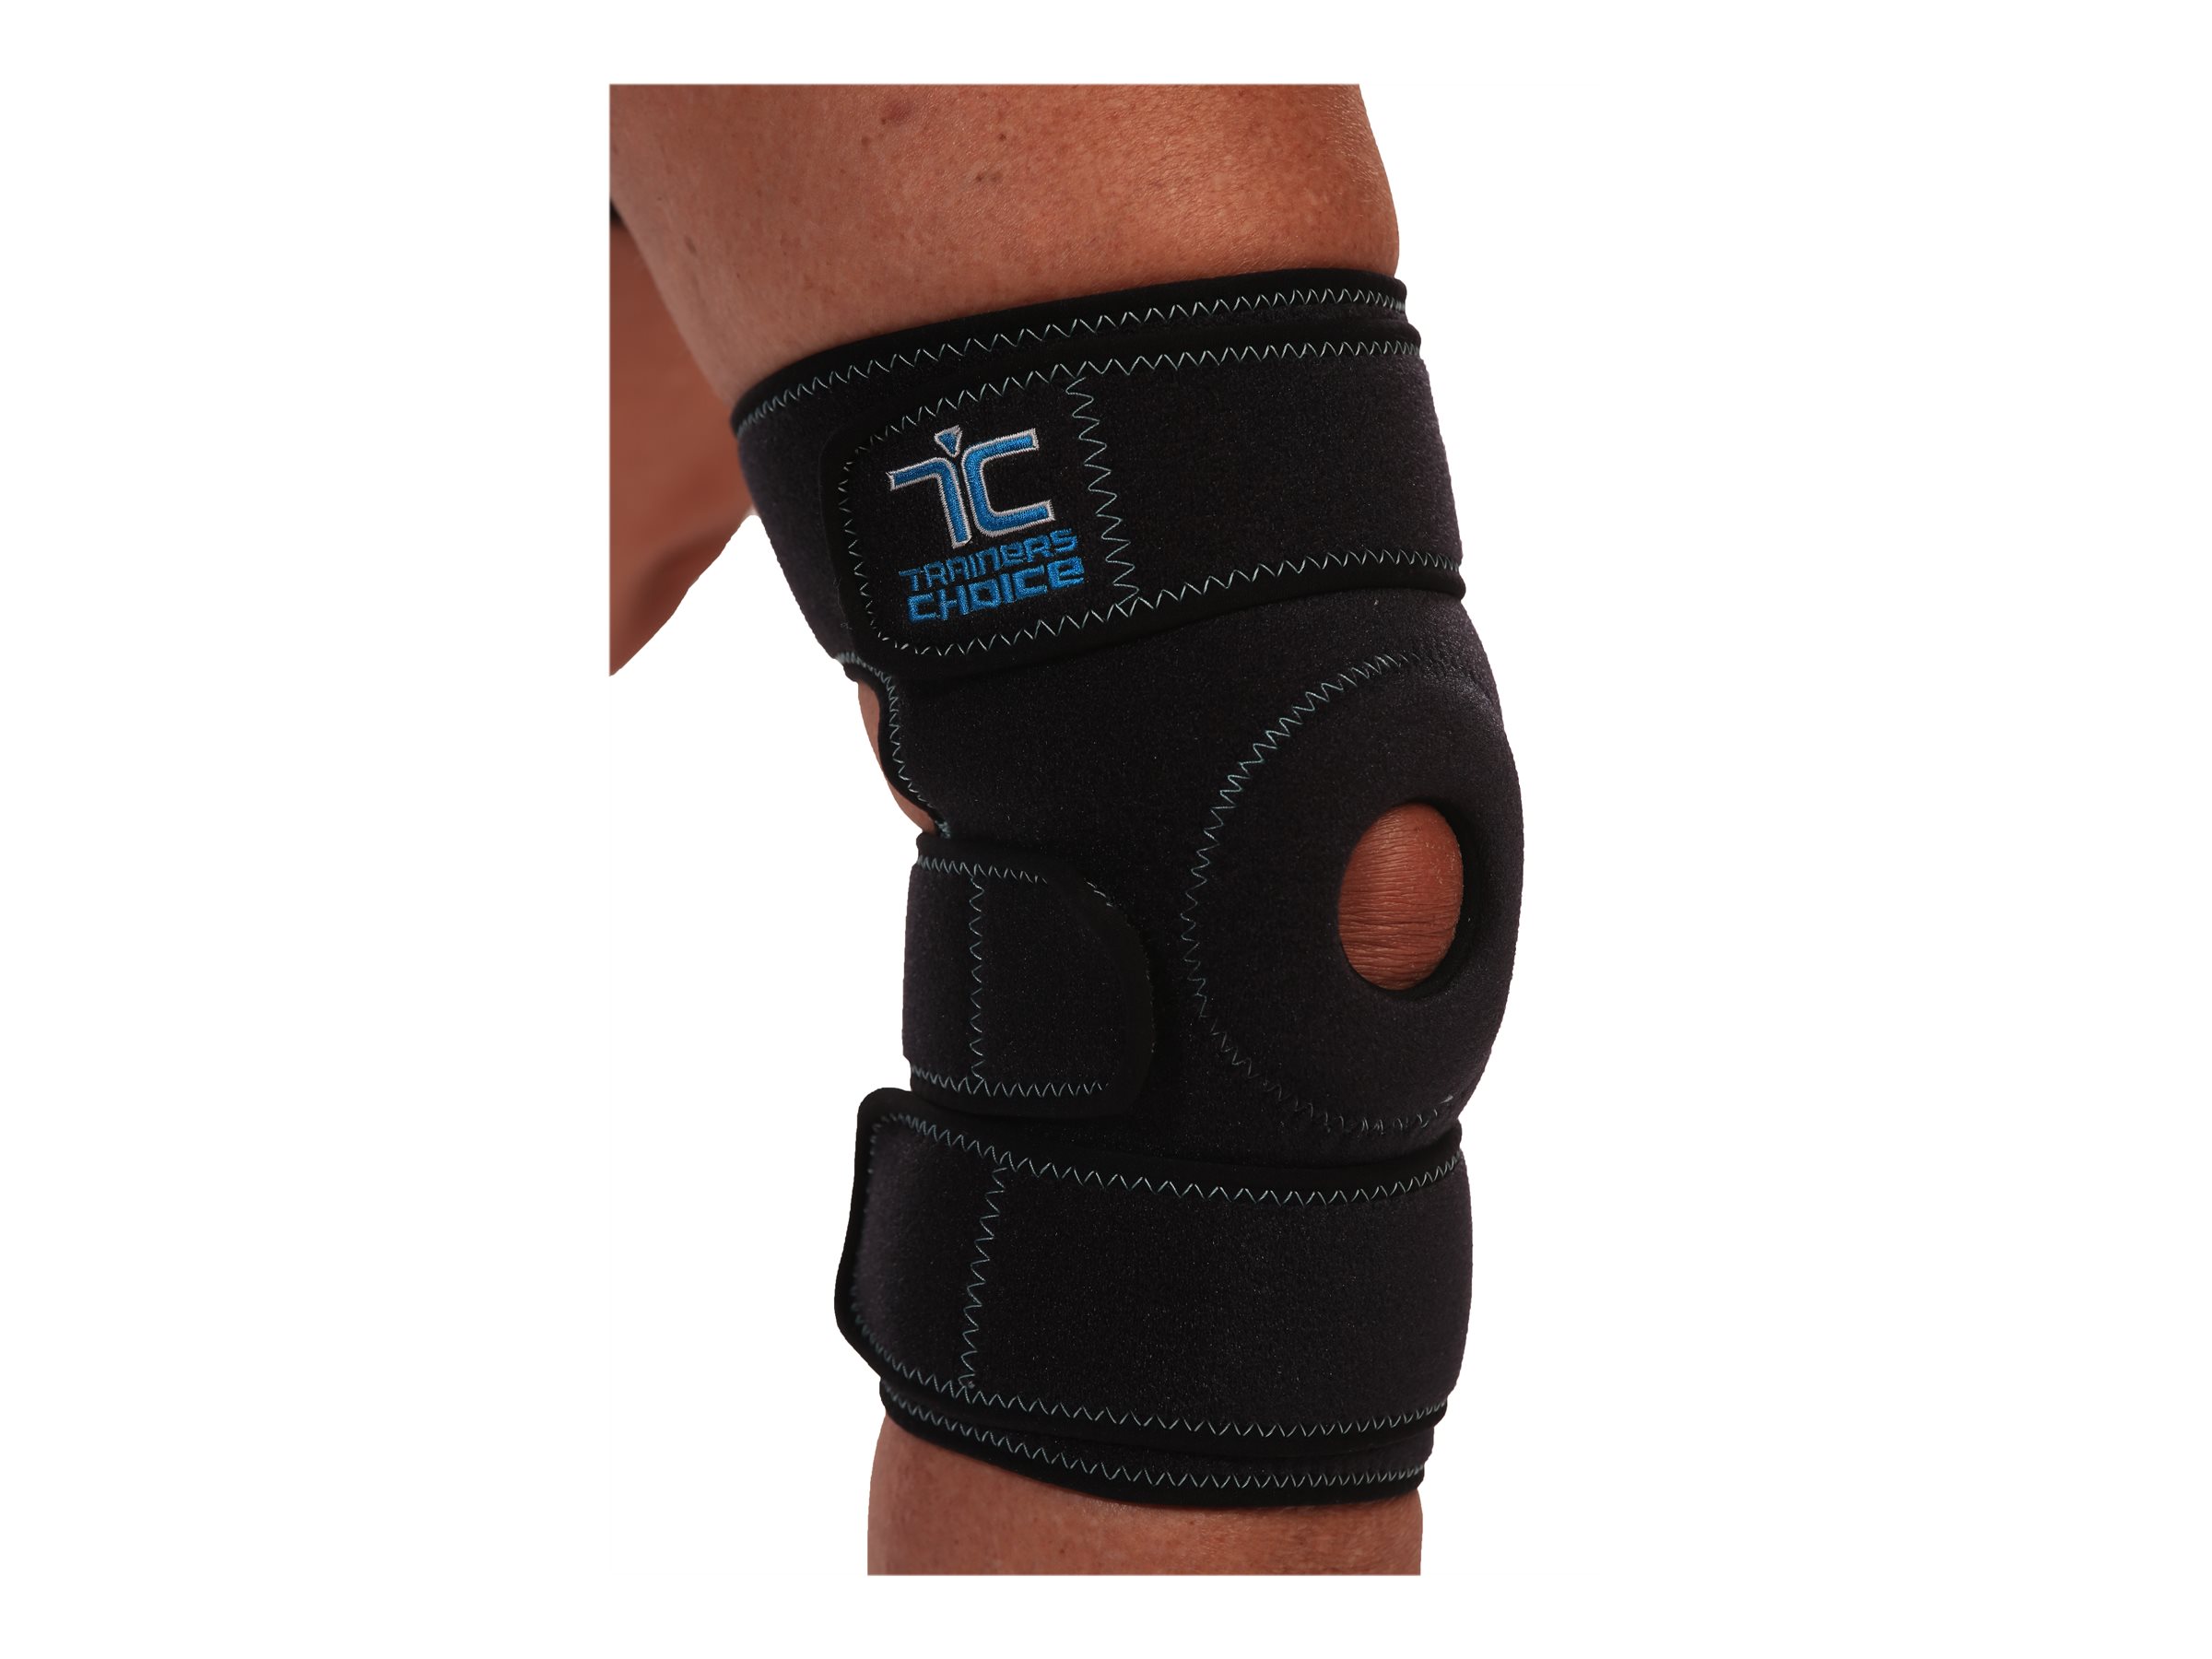 Trainers Choice Knee Stabilizer - Black - One Size